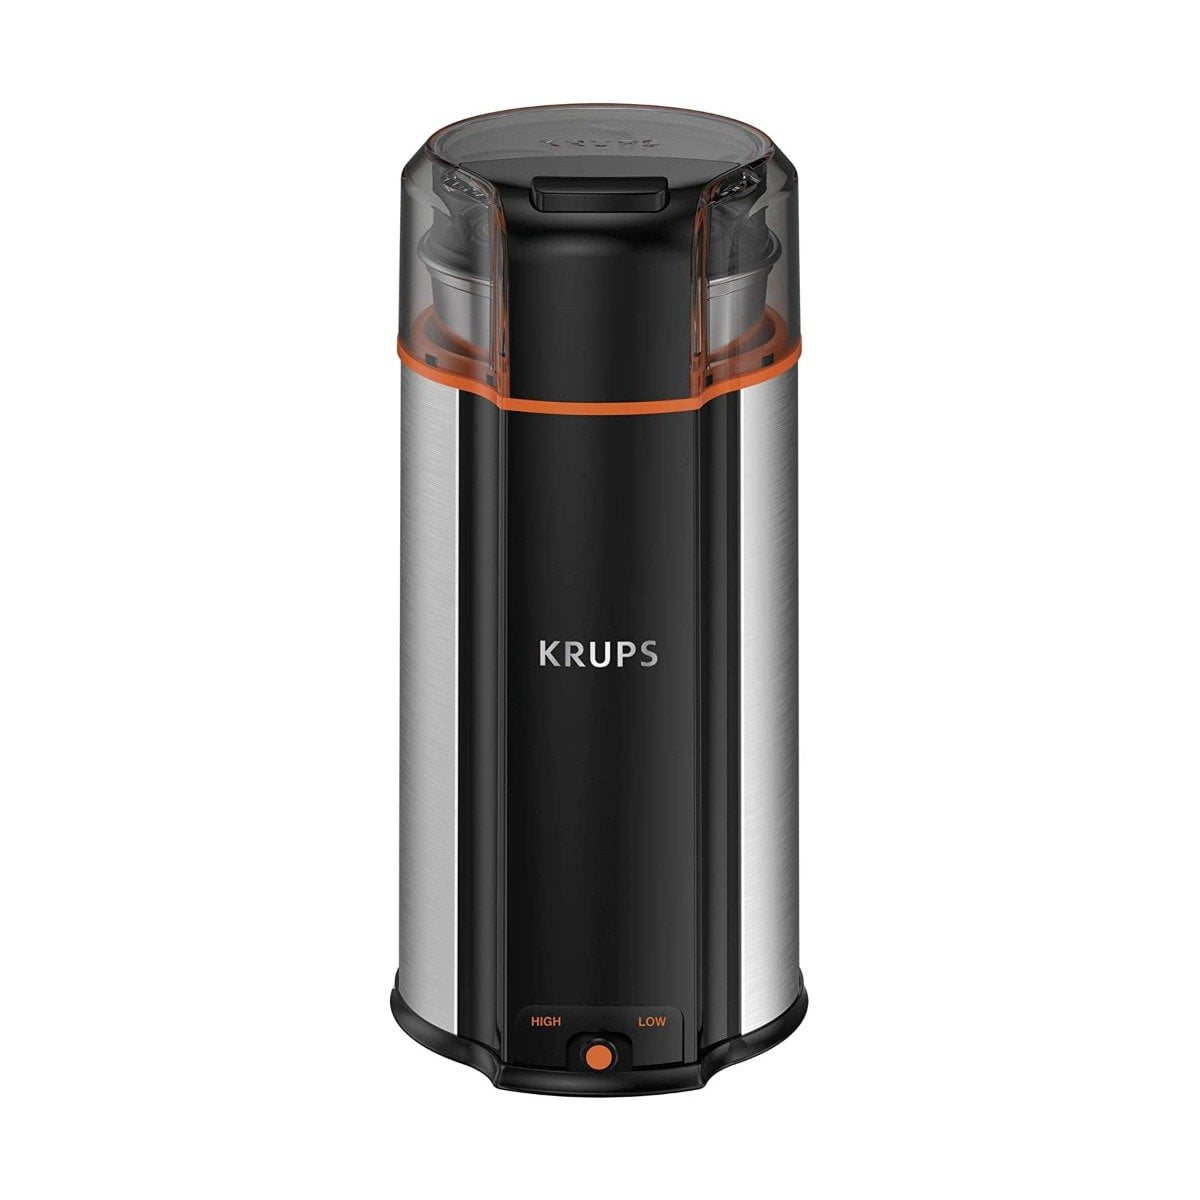 Krups Coffee and Spice Grinder 1 ea, Shop